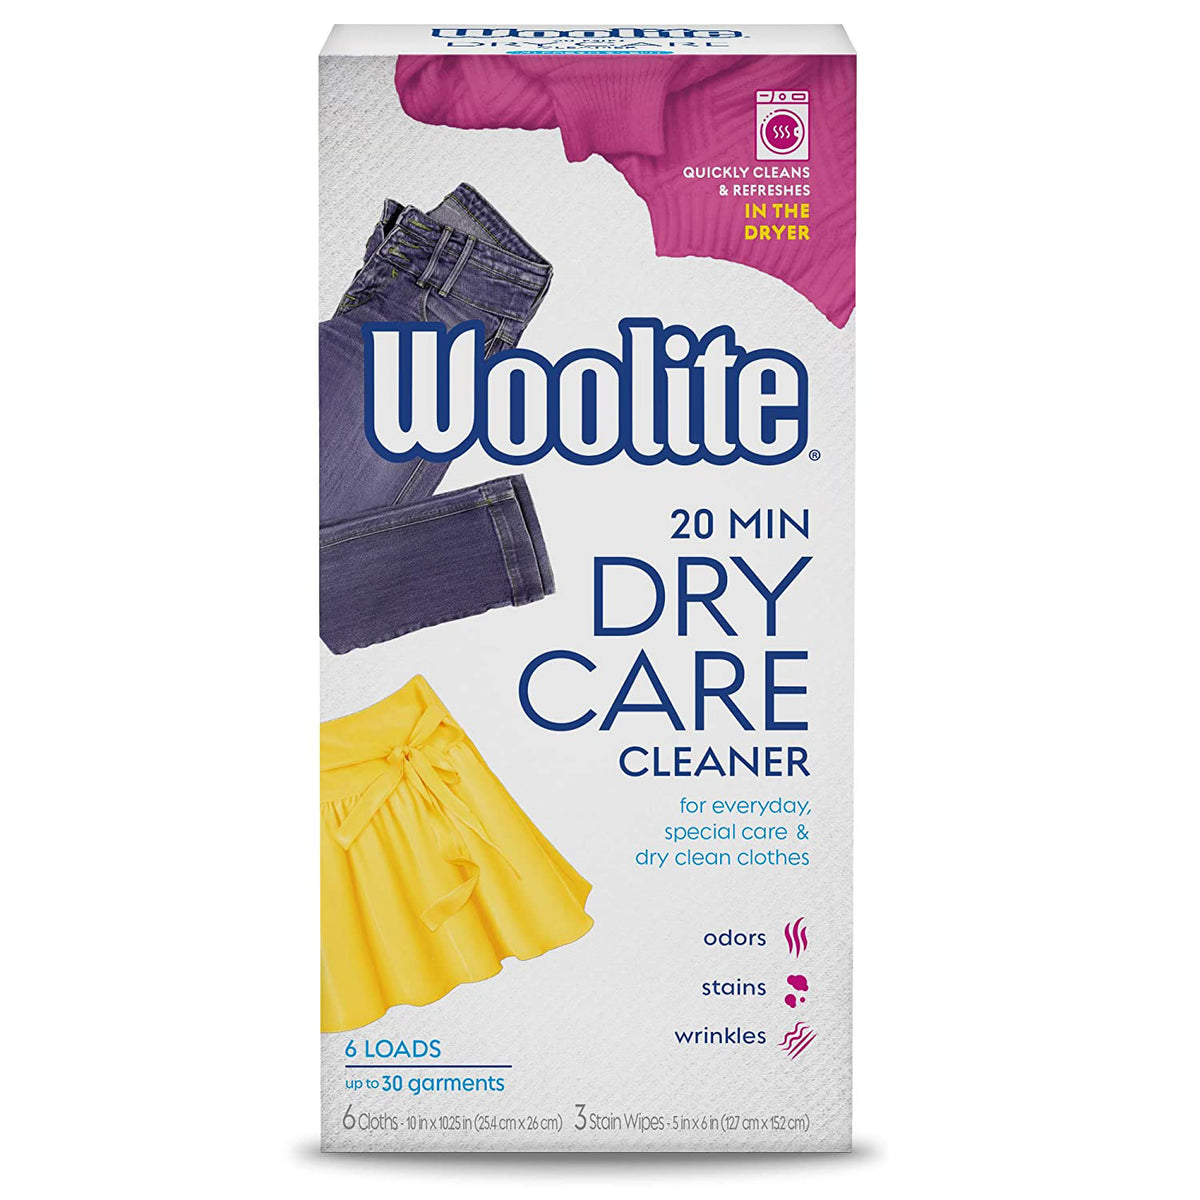 Woolite Dry Care Cleaner Cloths